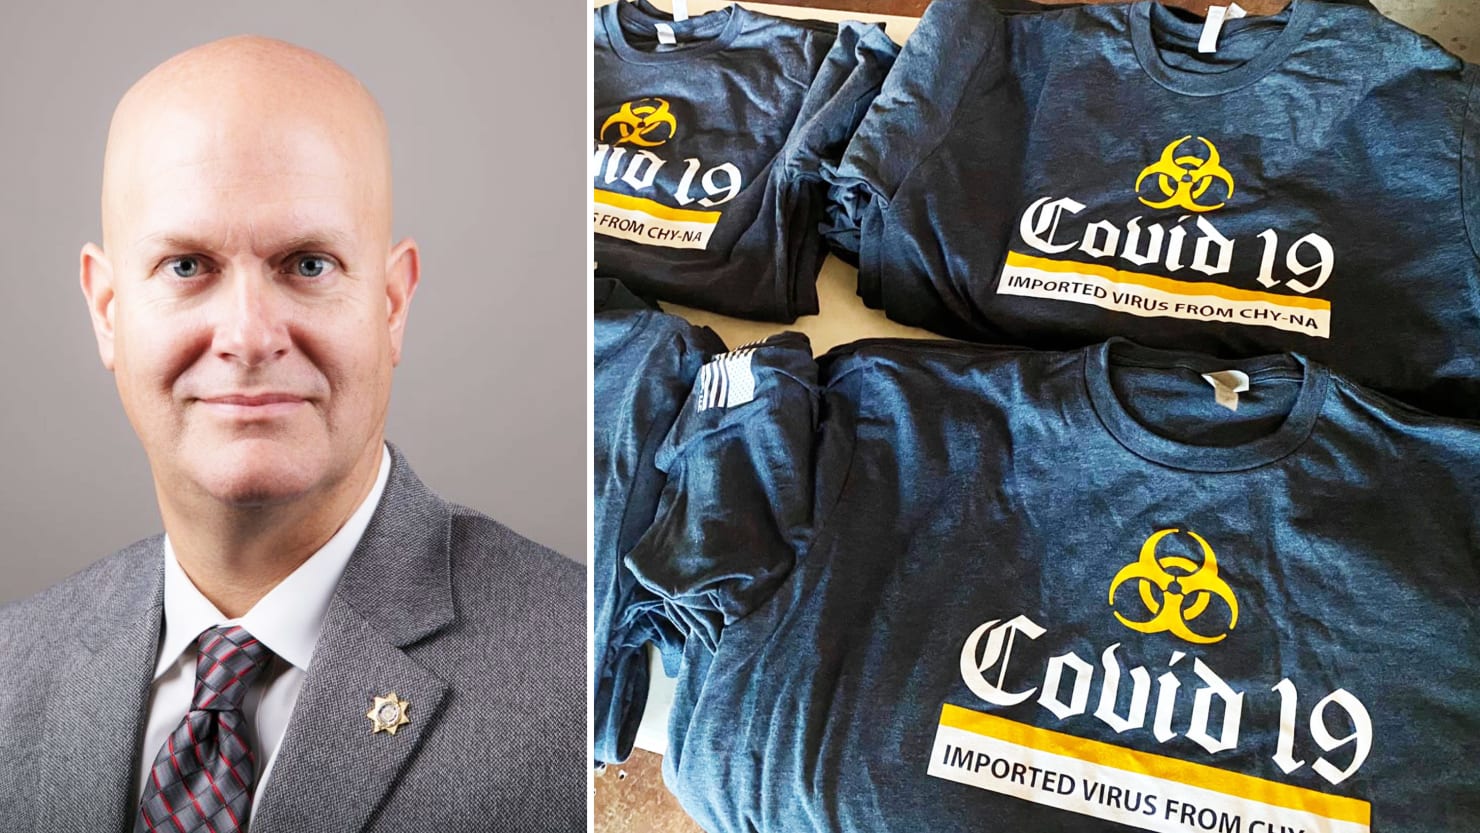 Jay Baker, spokesman for the Georgia sheriff, posted racist COVID shirts on Facebook